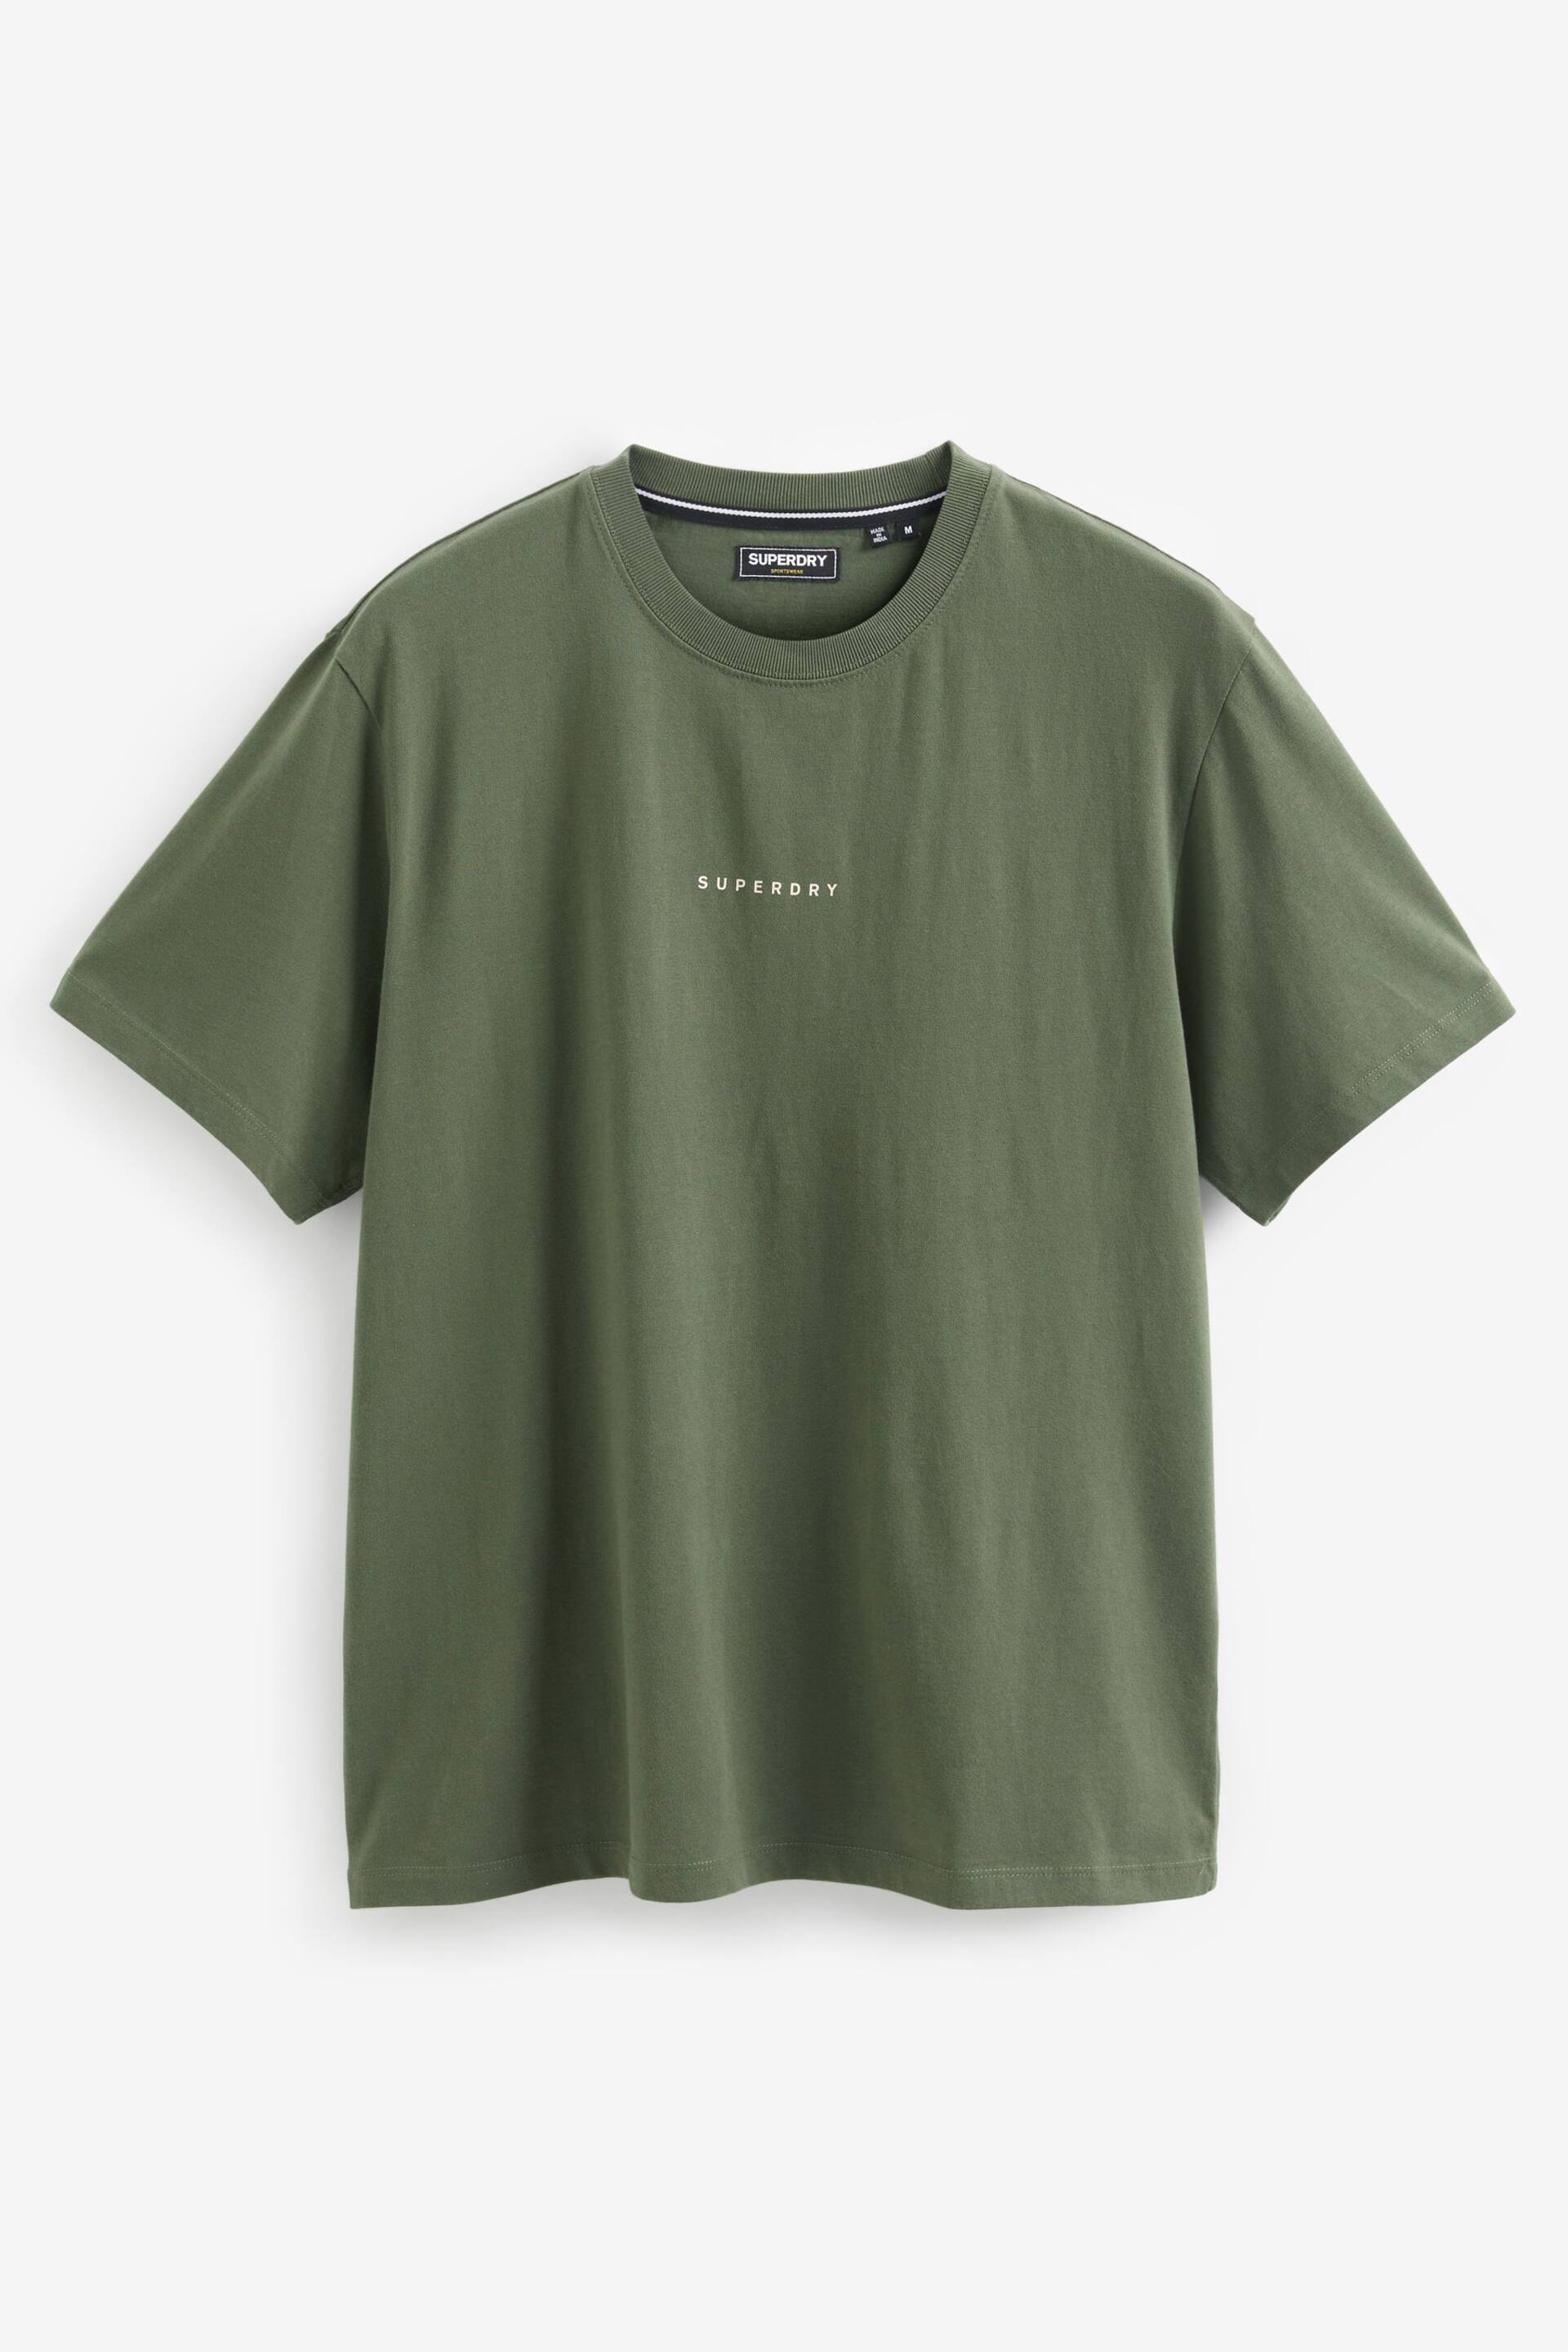 Superdry Green Code Surplus Logo Oversized Relaxed Fit T-Shirt - Image 3 of 5